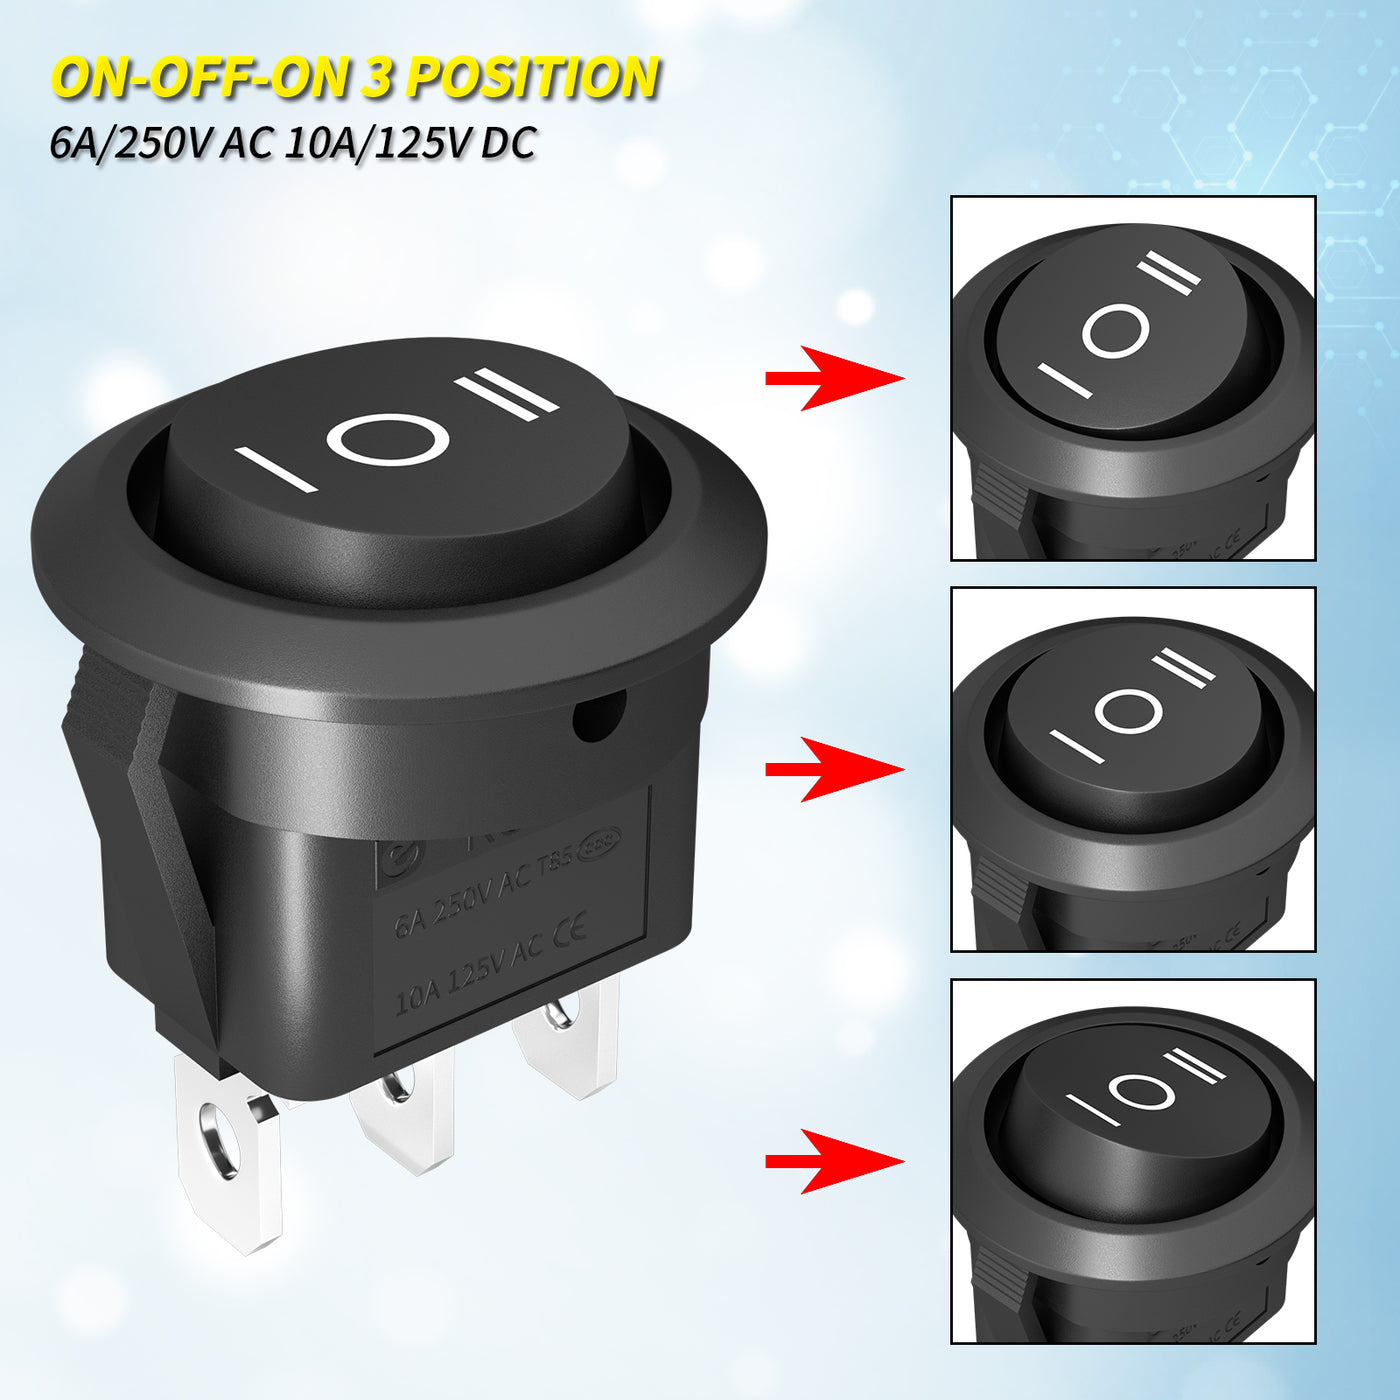 KCD1-8-103 ON-OFF-ON 3 Position Rocker Switch